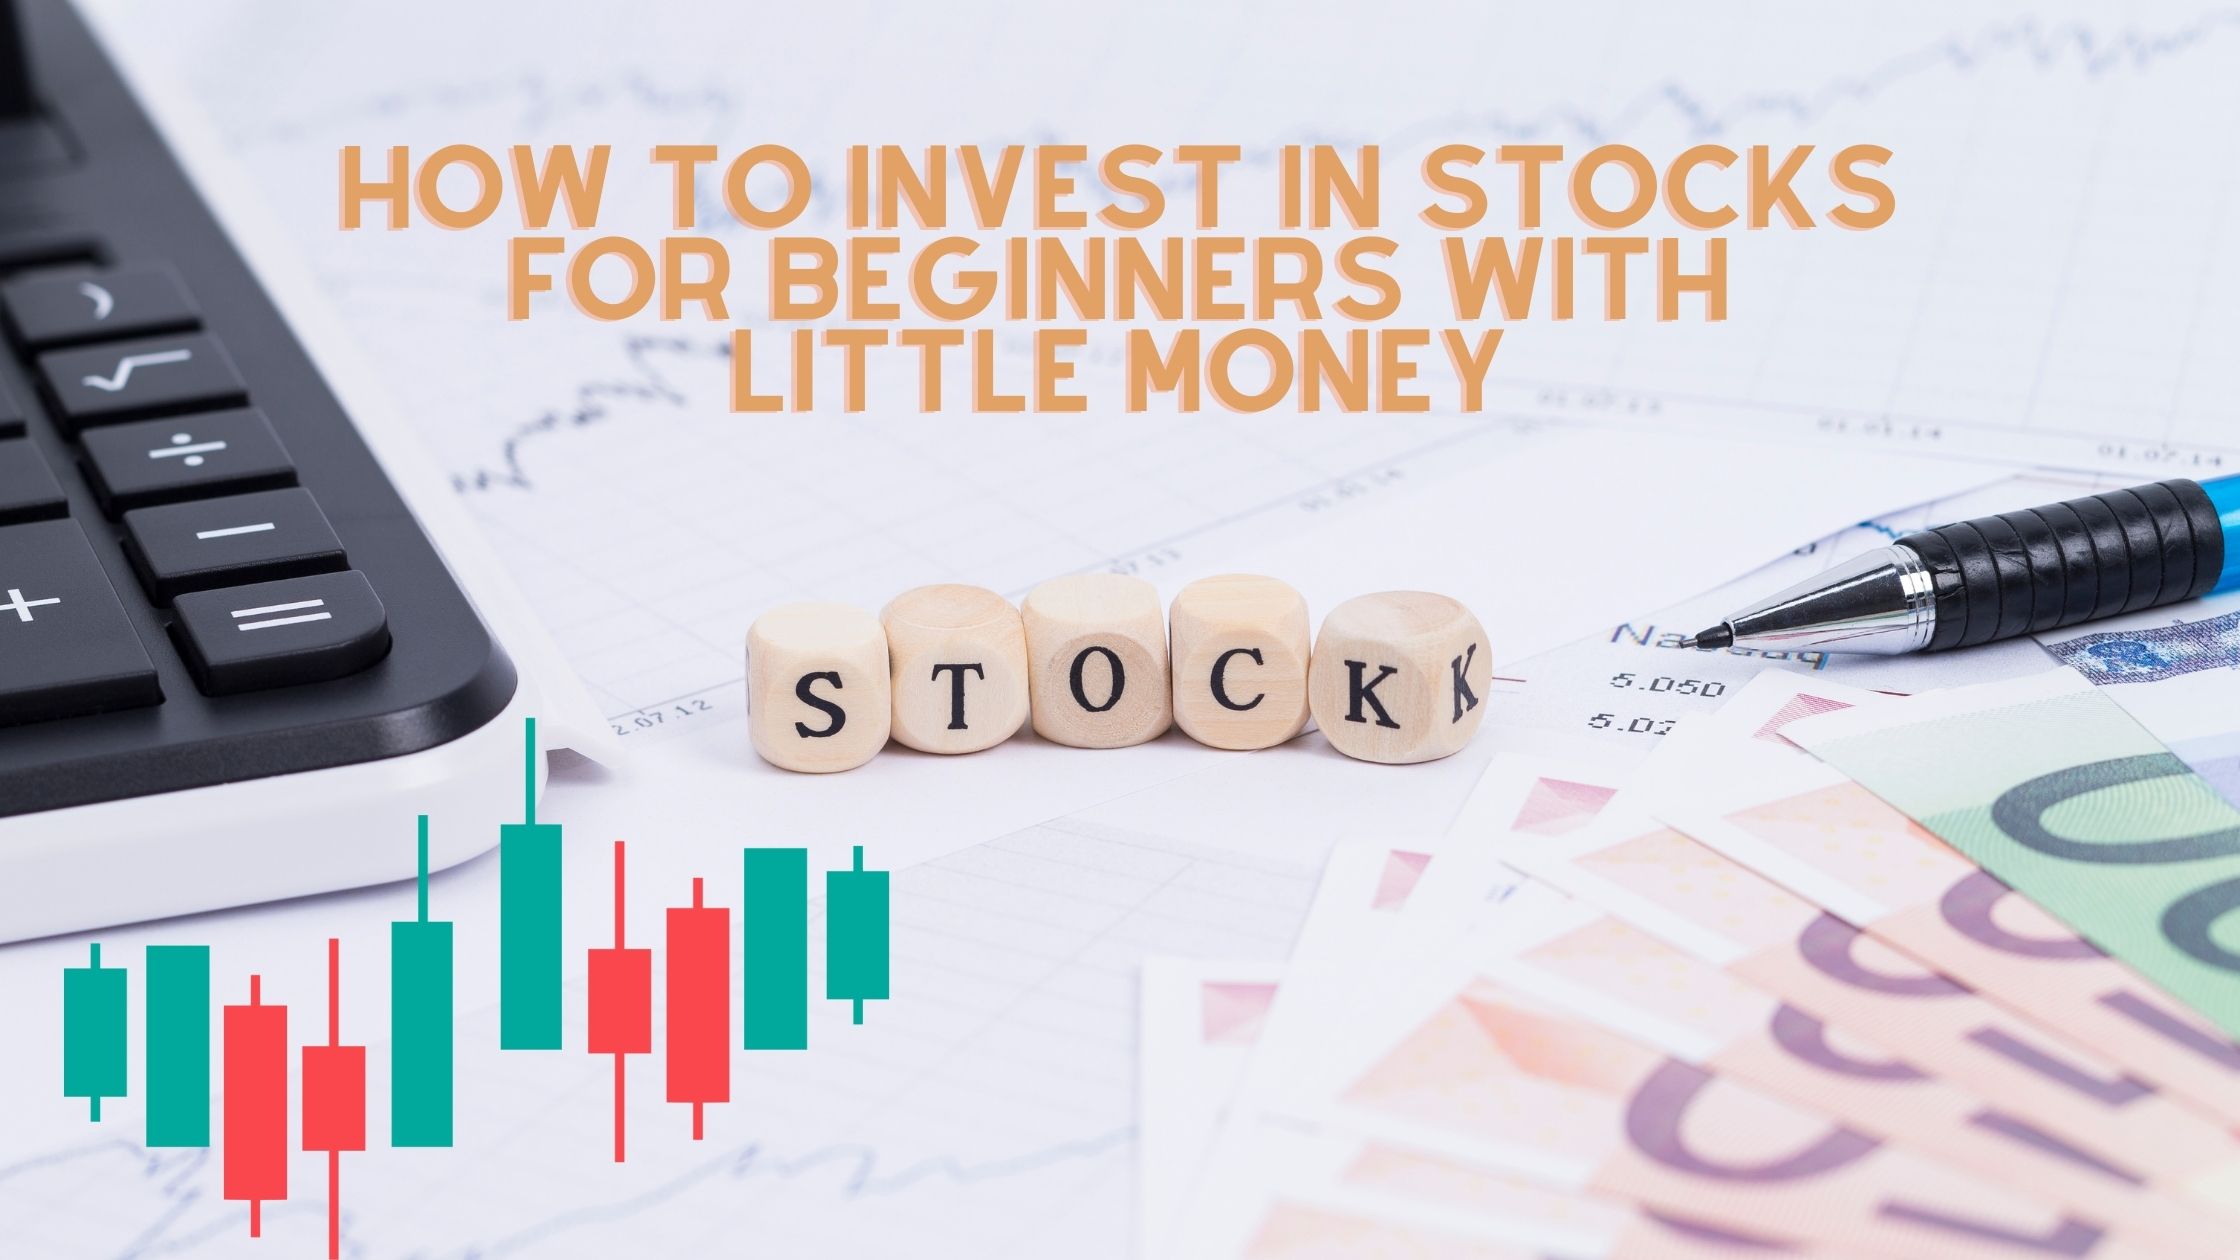 investing for beginners, invest in stock for beginners, stock market for beginners, stocks for beginners, stock trading for beginners, investing money for beginners,